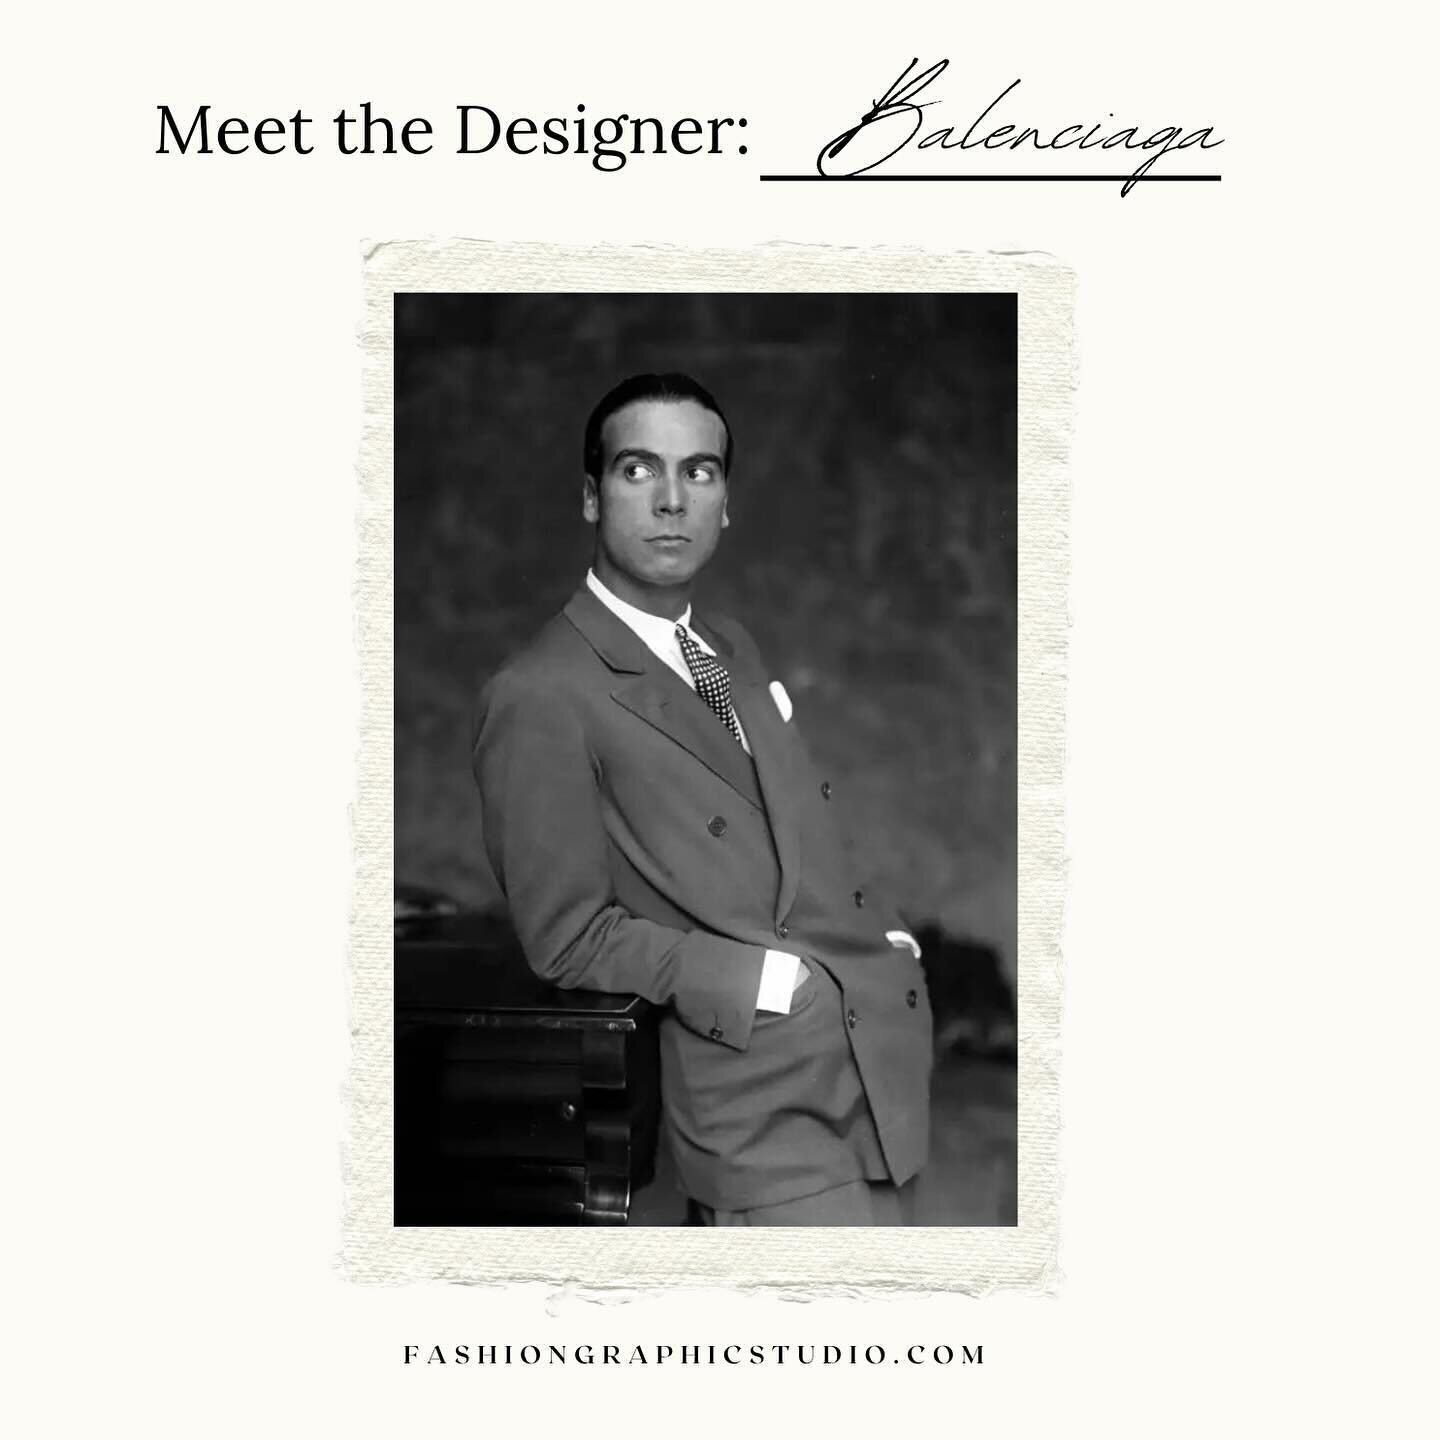 I recently watched the Cristobal Balenciaga TV series on Disney+. It was quite intriguing, so this month&rsquo;s designer spotlight is all about him. 

Have you had a chance to see the show?

#fashiongraphicstudio #newsletterdesign #freelancegraphicd